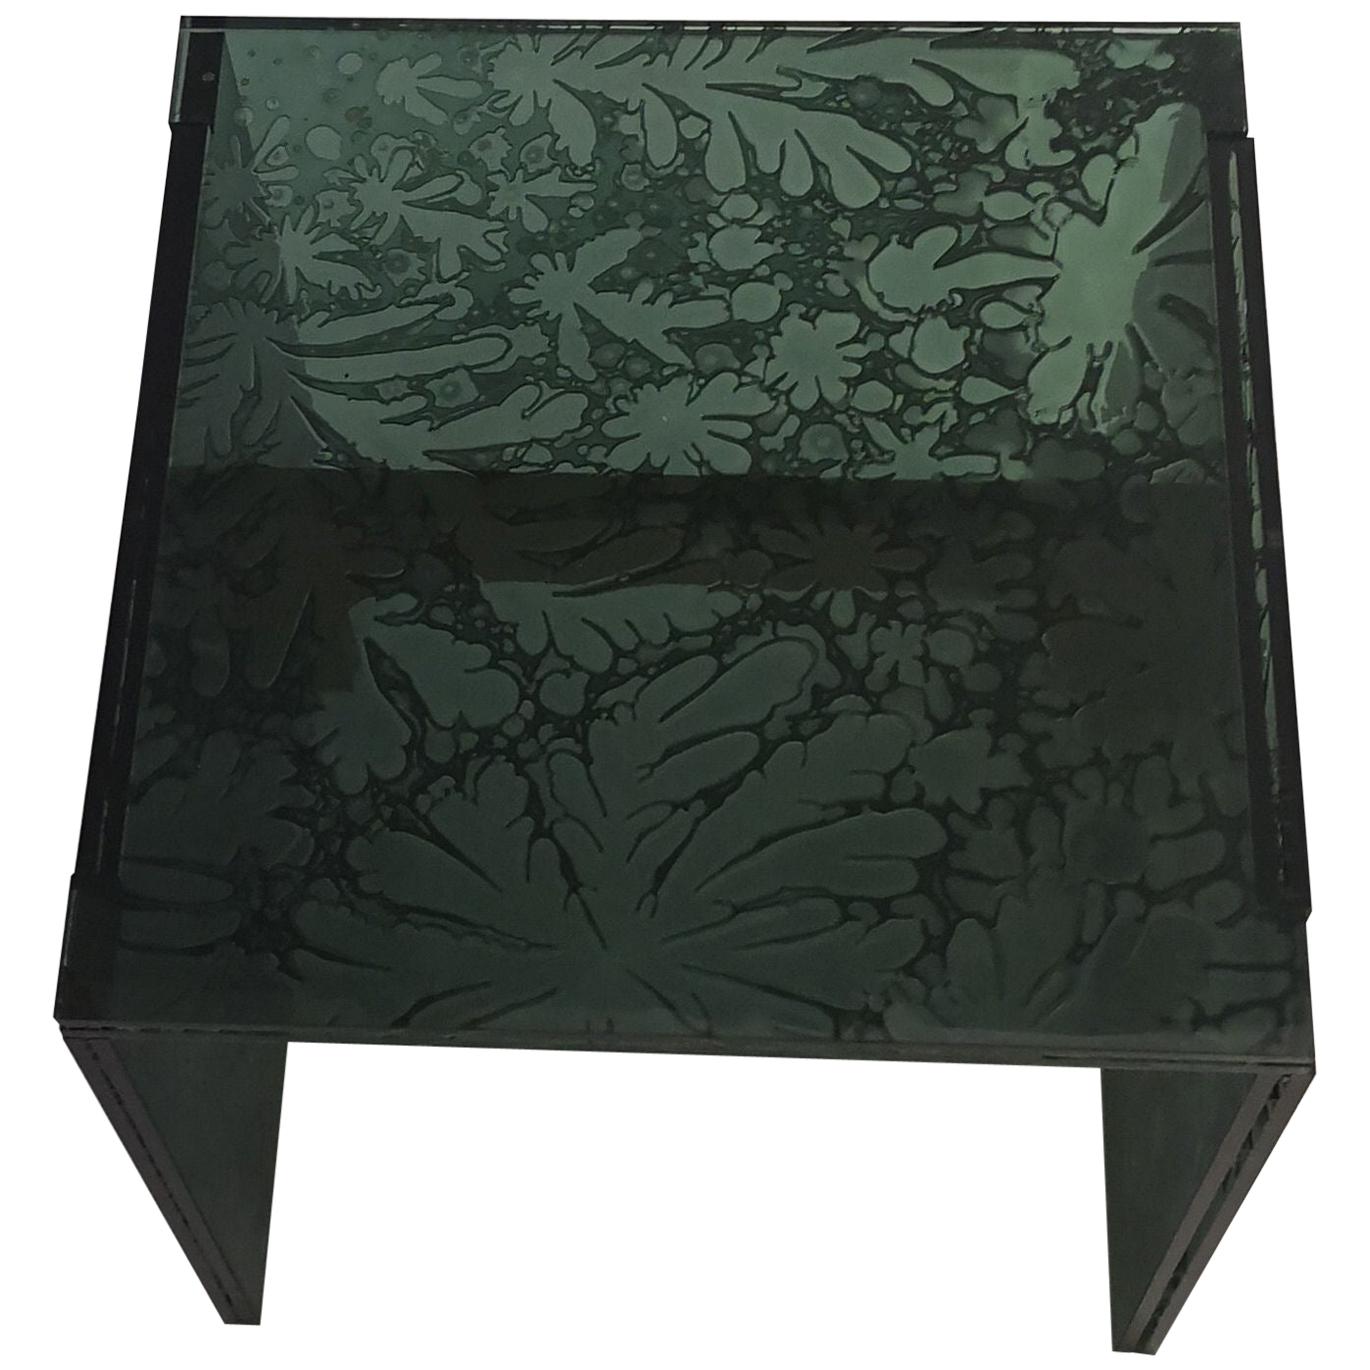 Sketch Quadro Side Table 1 Made of Green Moss Acrylic Des, Roberto Giacomucci